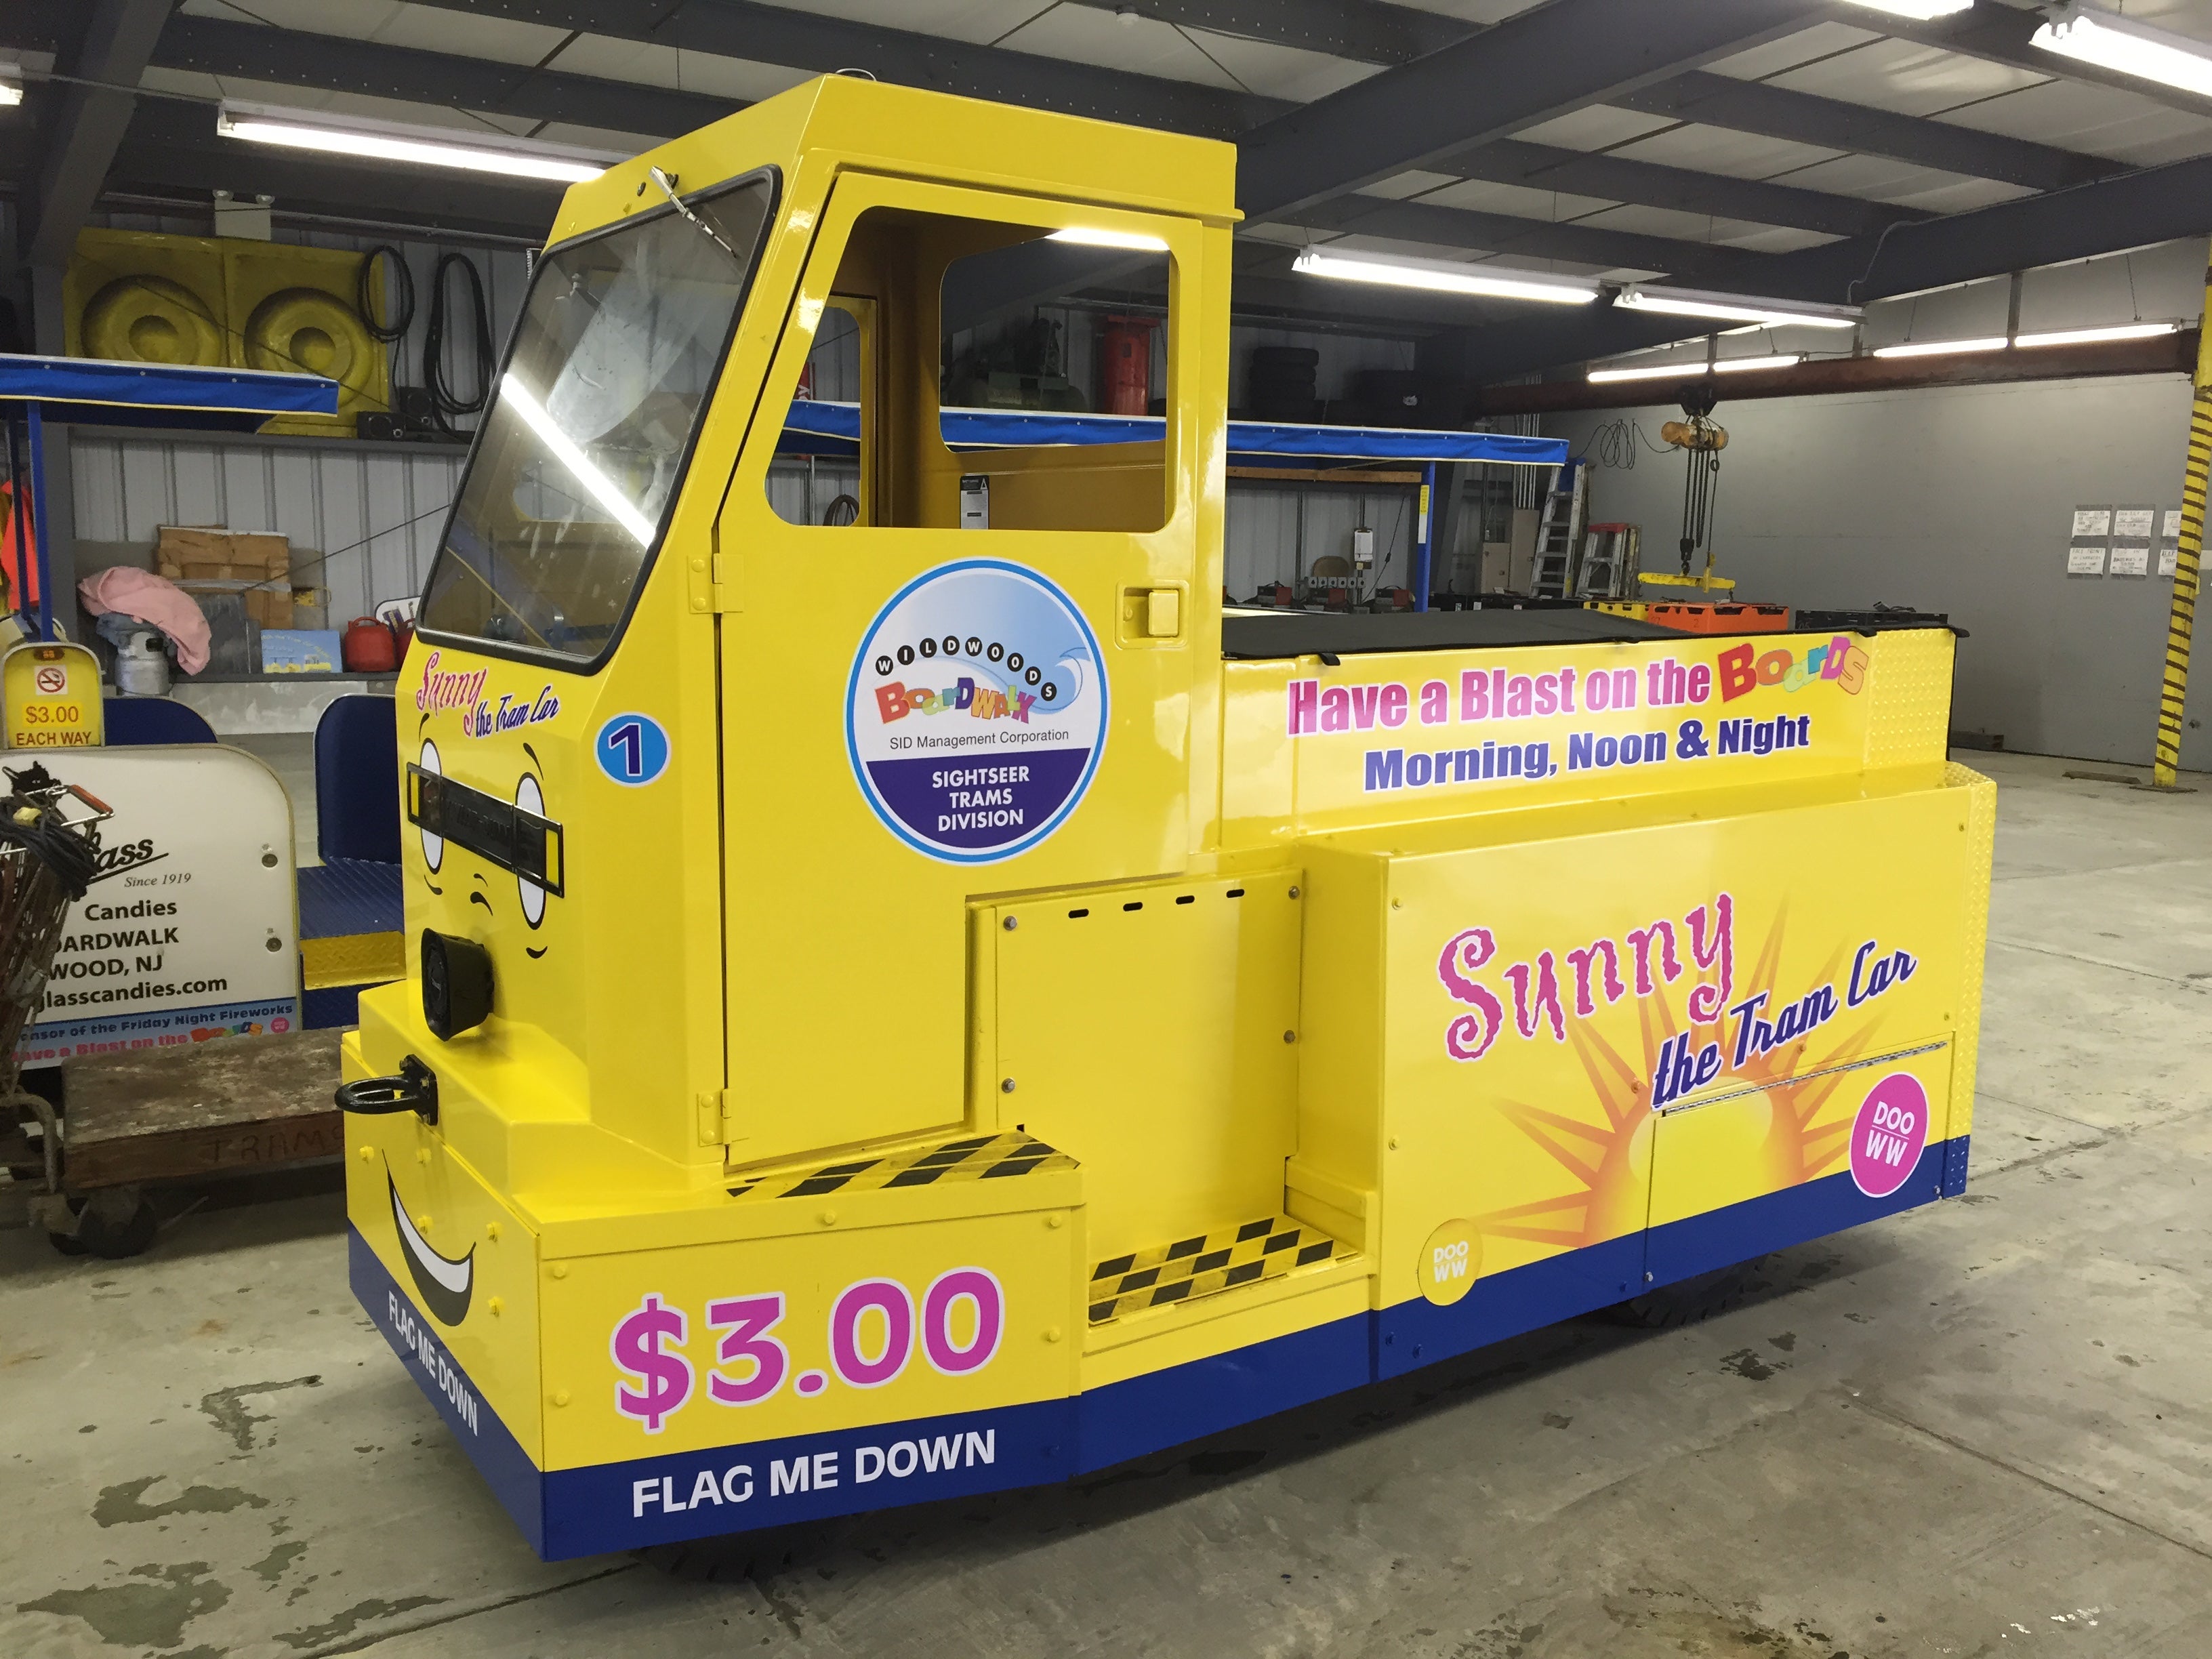  Temporary tram car engine will be appearing on the Boardwalk in  Wildwood, New Jersey. (Courtesy Patrick Rosenello) 